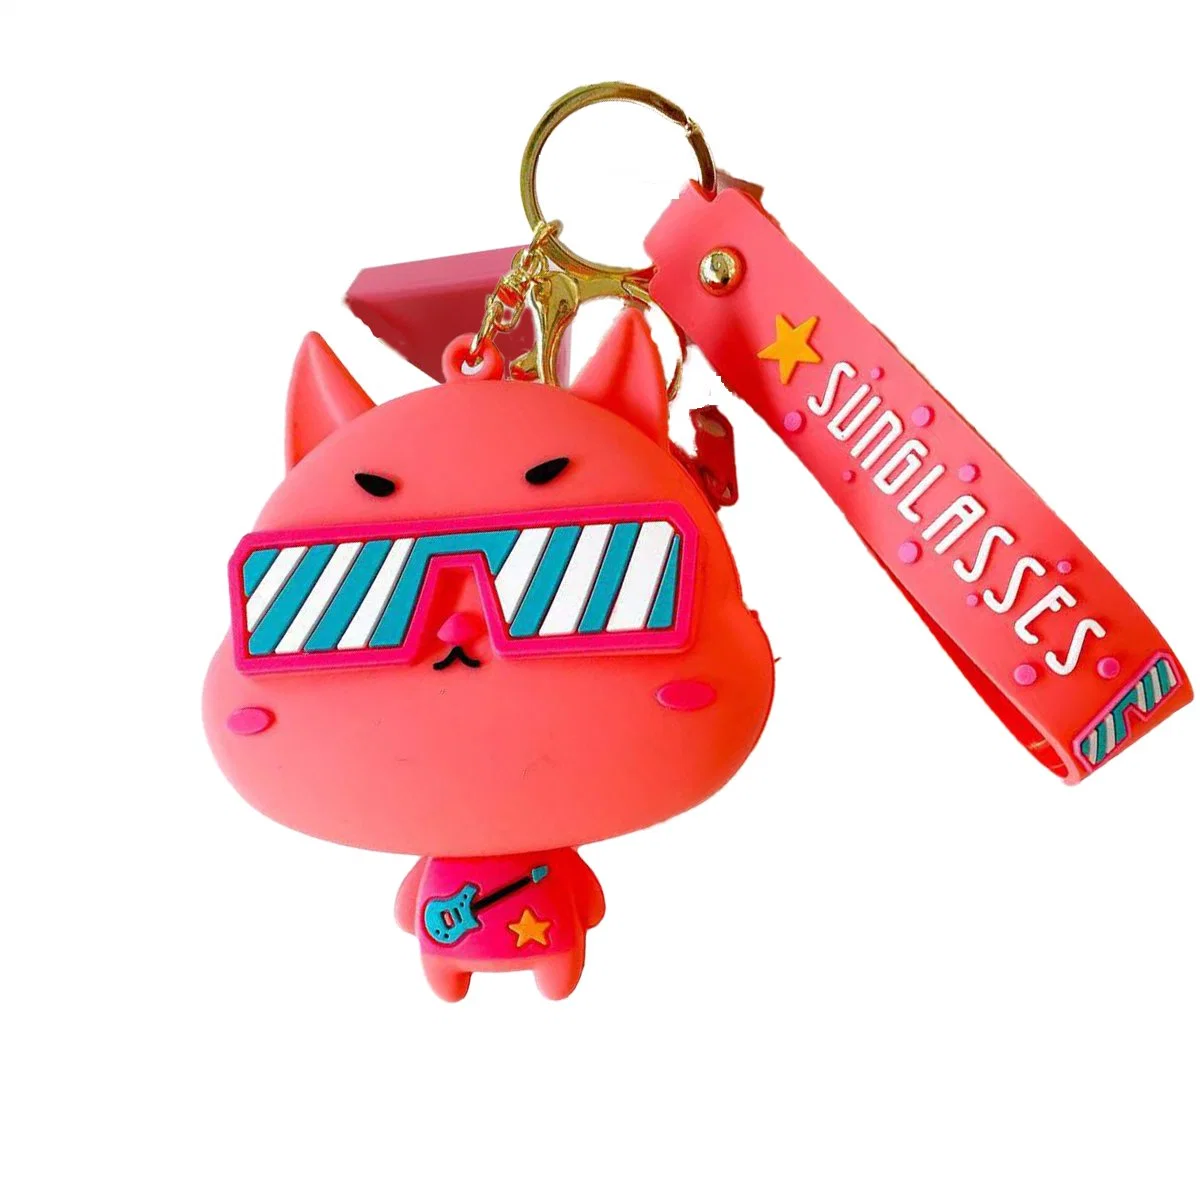 Coin Purse Keychain with Blue Tooth Tracker for Kids Gifts